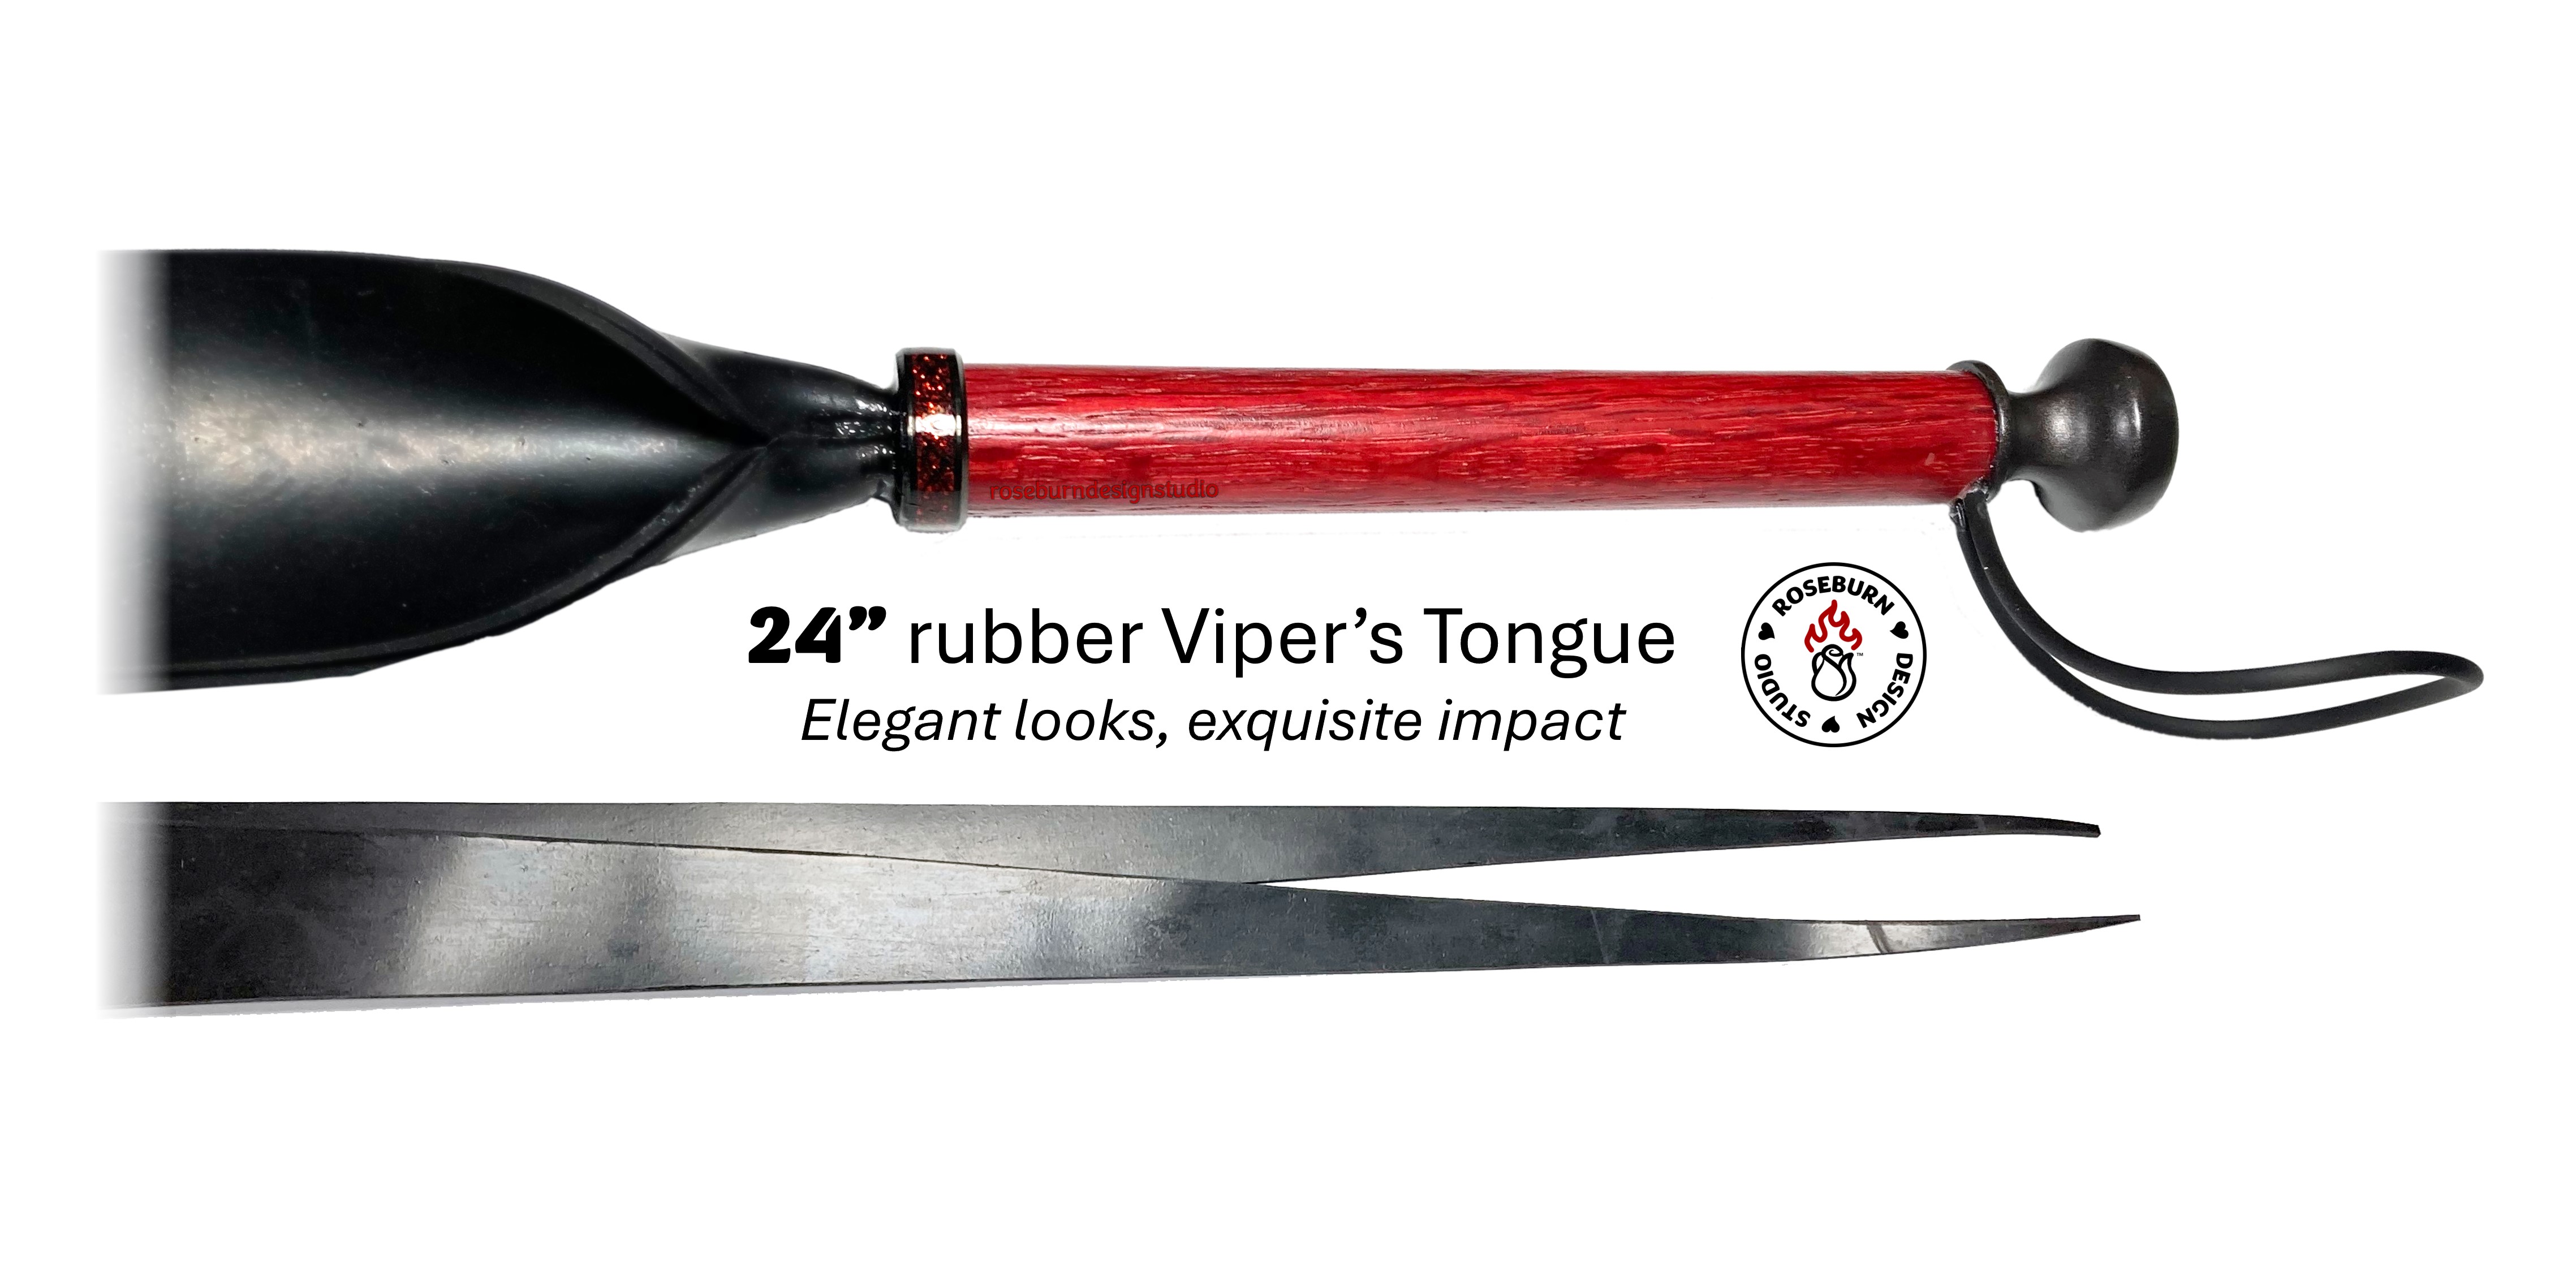 Viper's Tongue 24" rubber and hardwood whip photo